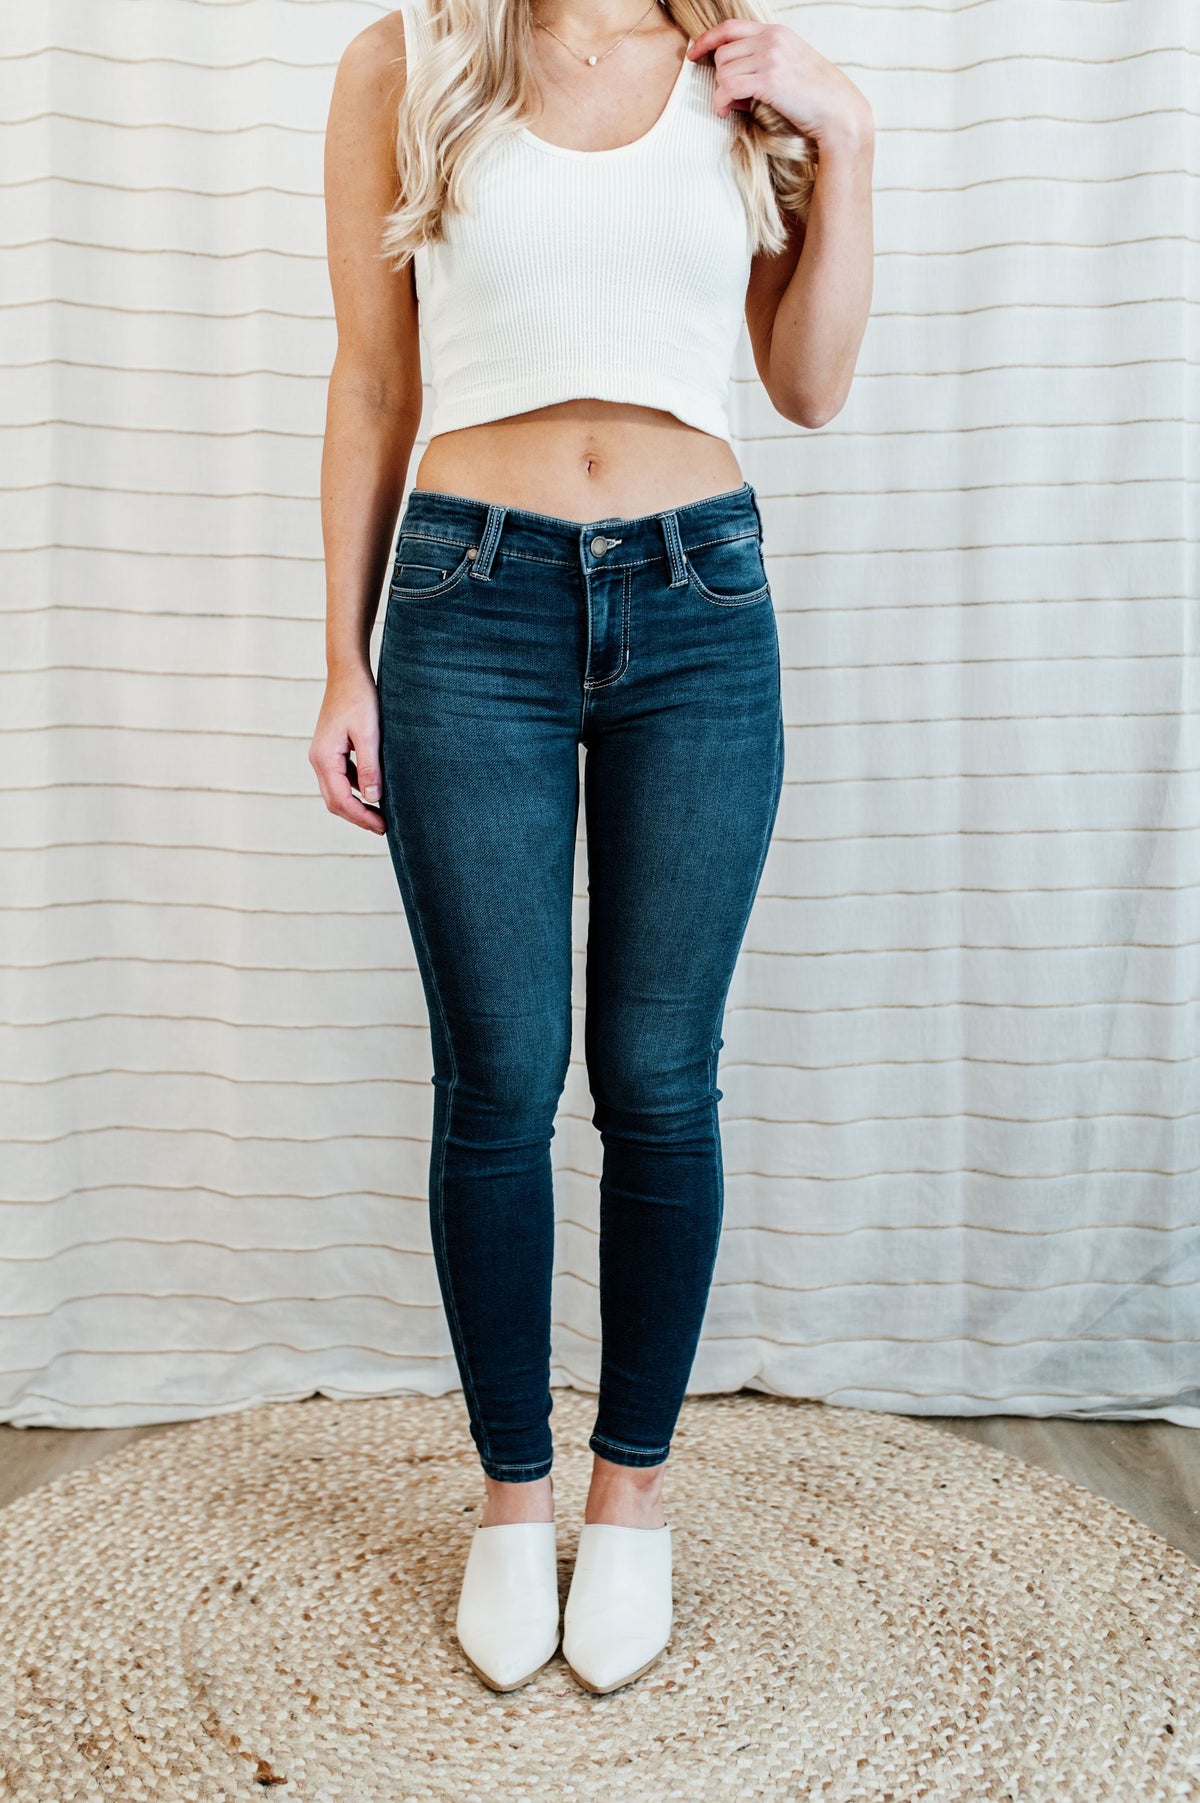 Pictured are med-wash, denim skinny jean with a low-rise waist, dark-wash, and skinny fit.